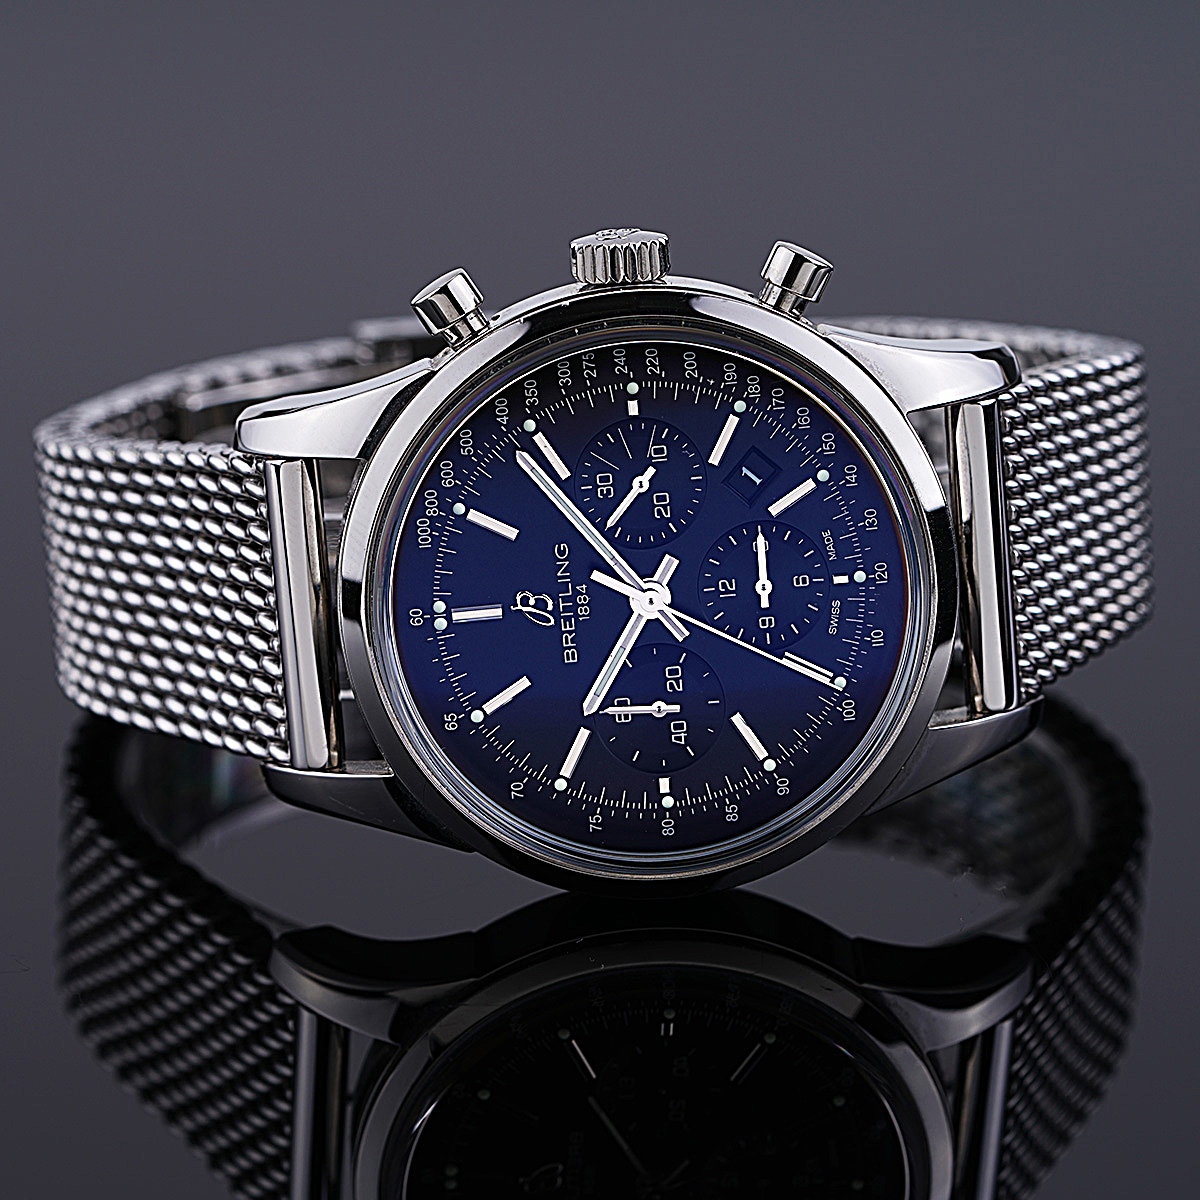 Breitling Transocean Watches for Sale - Authenticity Guaranteed 